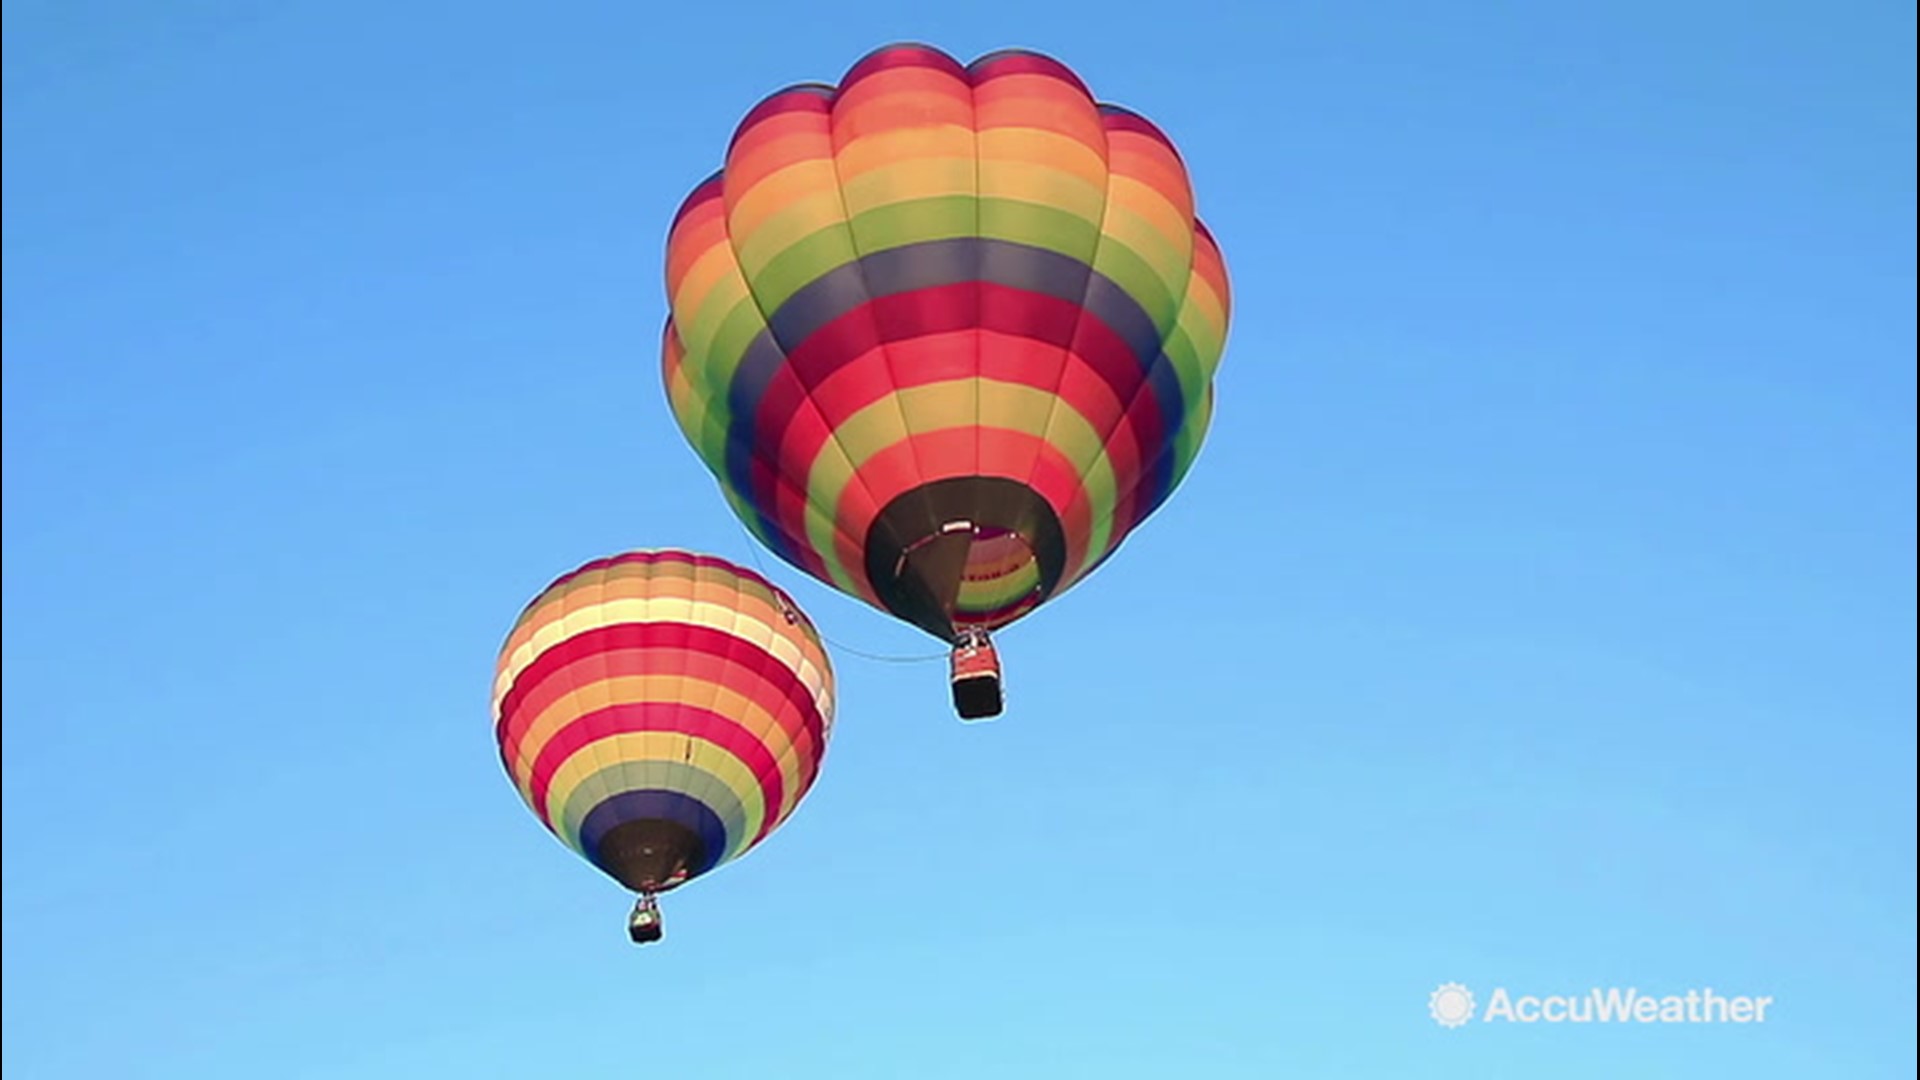 Ever wonder why you only see hot air balloons after sunrise or before sunset? That's because hot air balloons are dependent on weather and the sun.